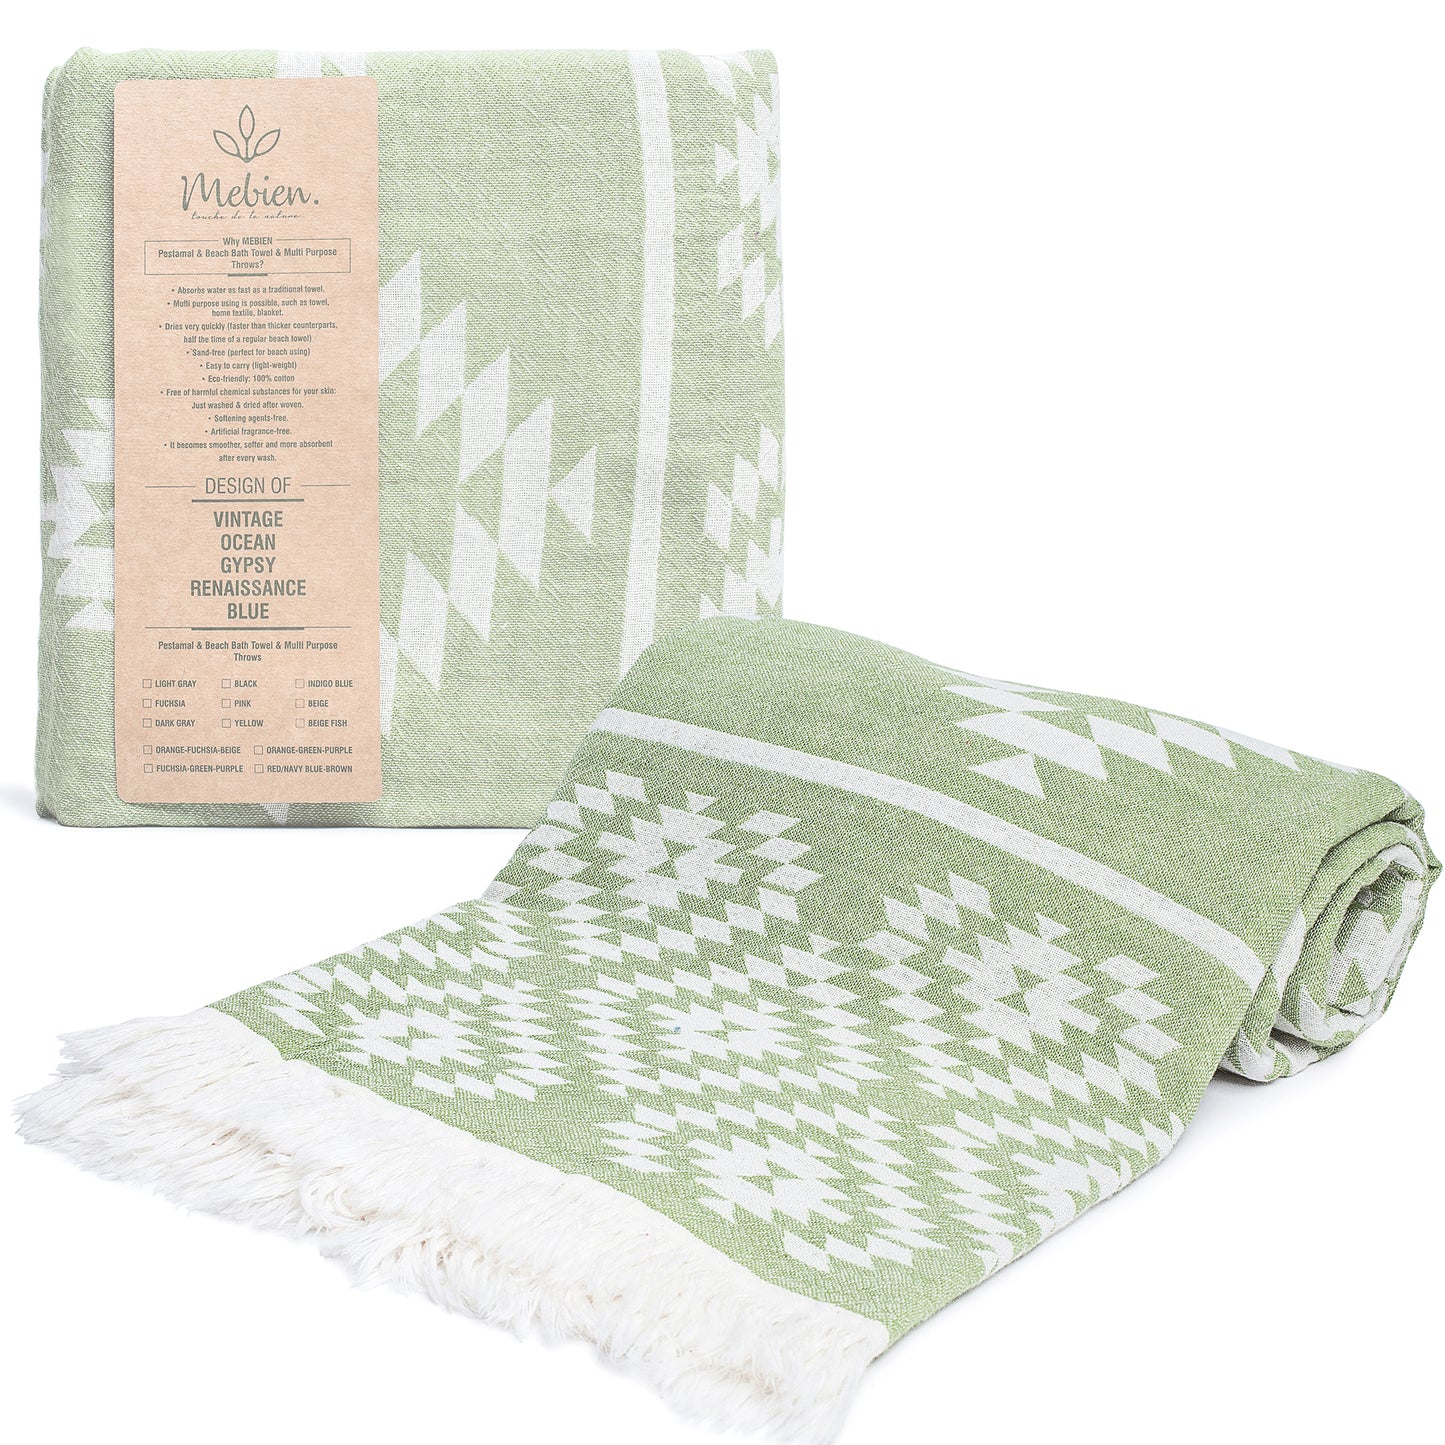 Soft Green Turkish Beach Towel (35”x67”)  Lightweight, Quick drying and Sand Free Can be Used as Beach Blanket 100% Cotton Vintage Design